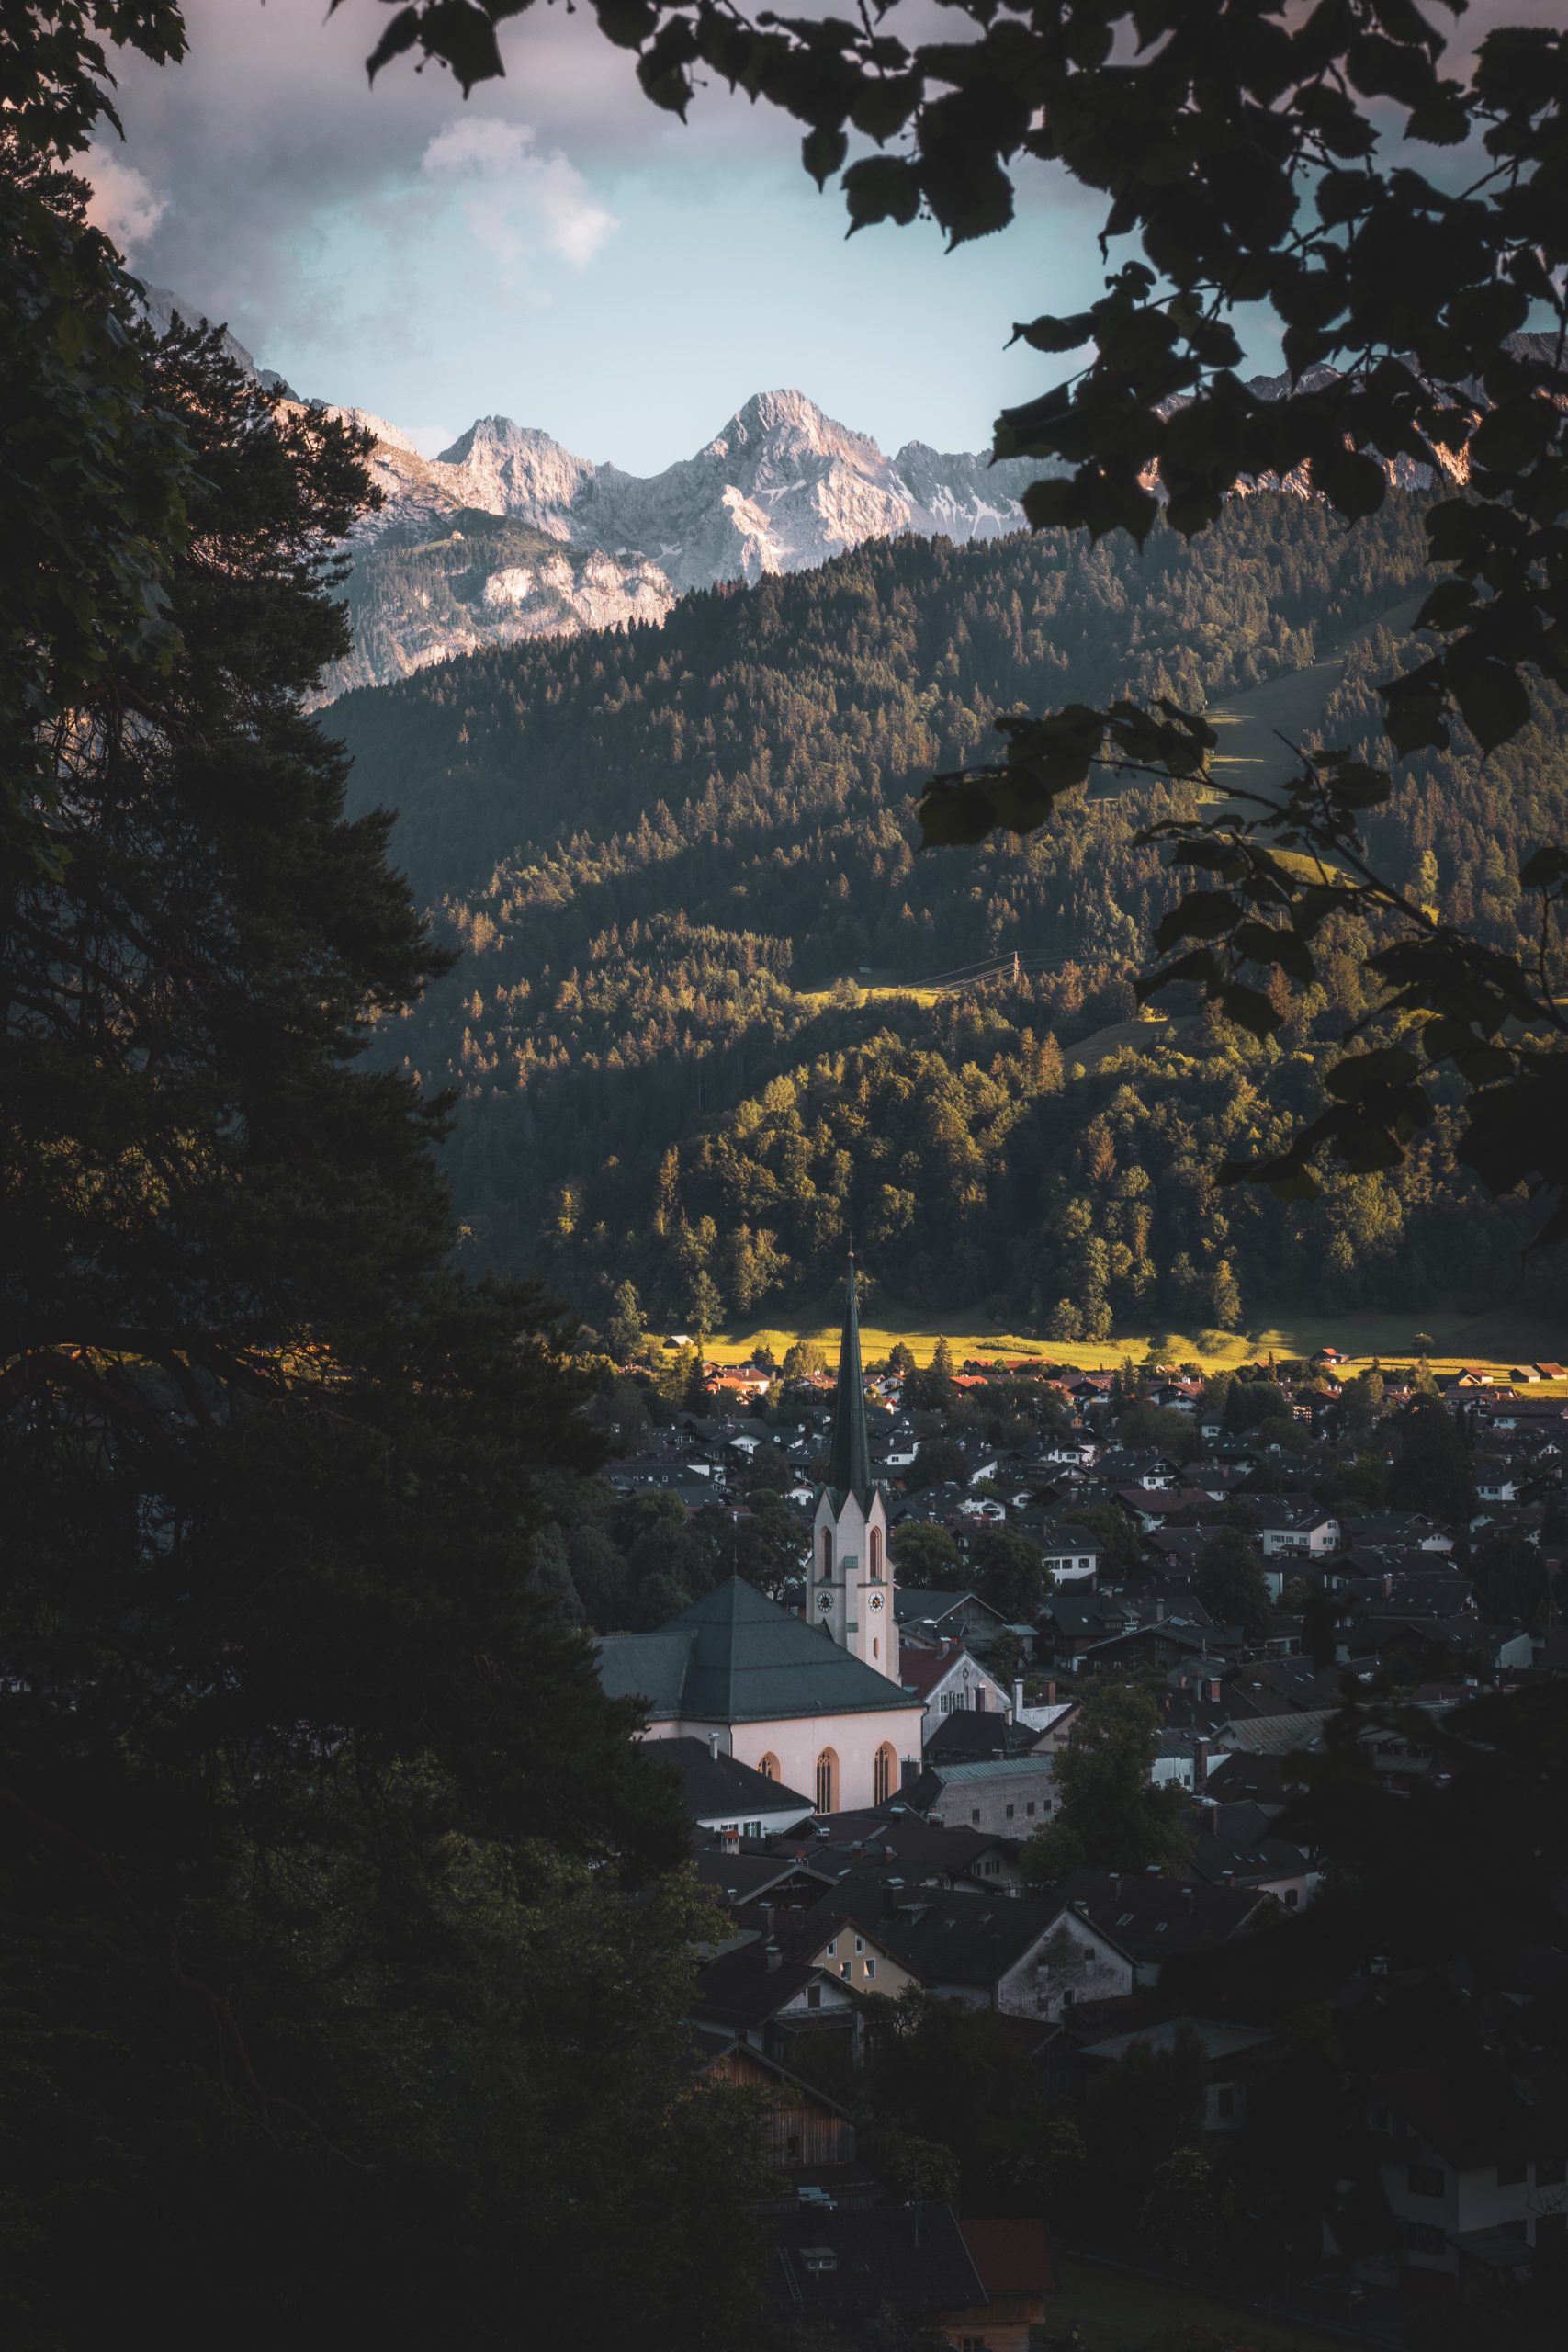 A beautiful scenic village in Germany featuring mountains and a church.